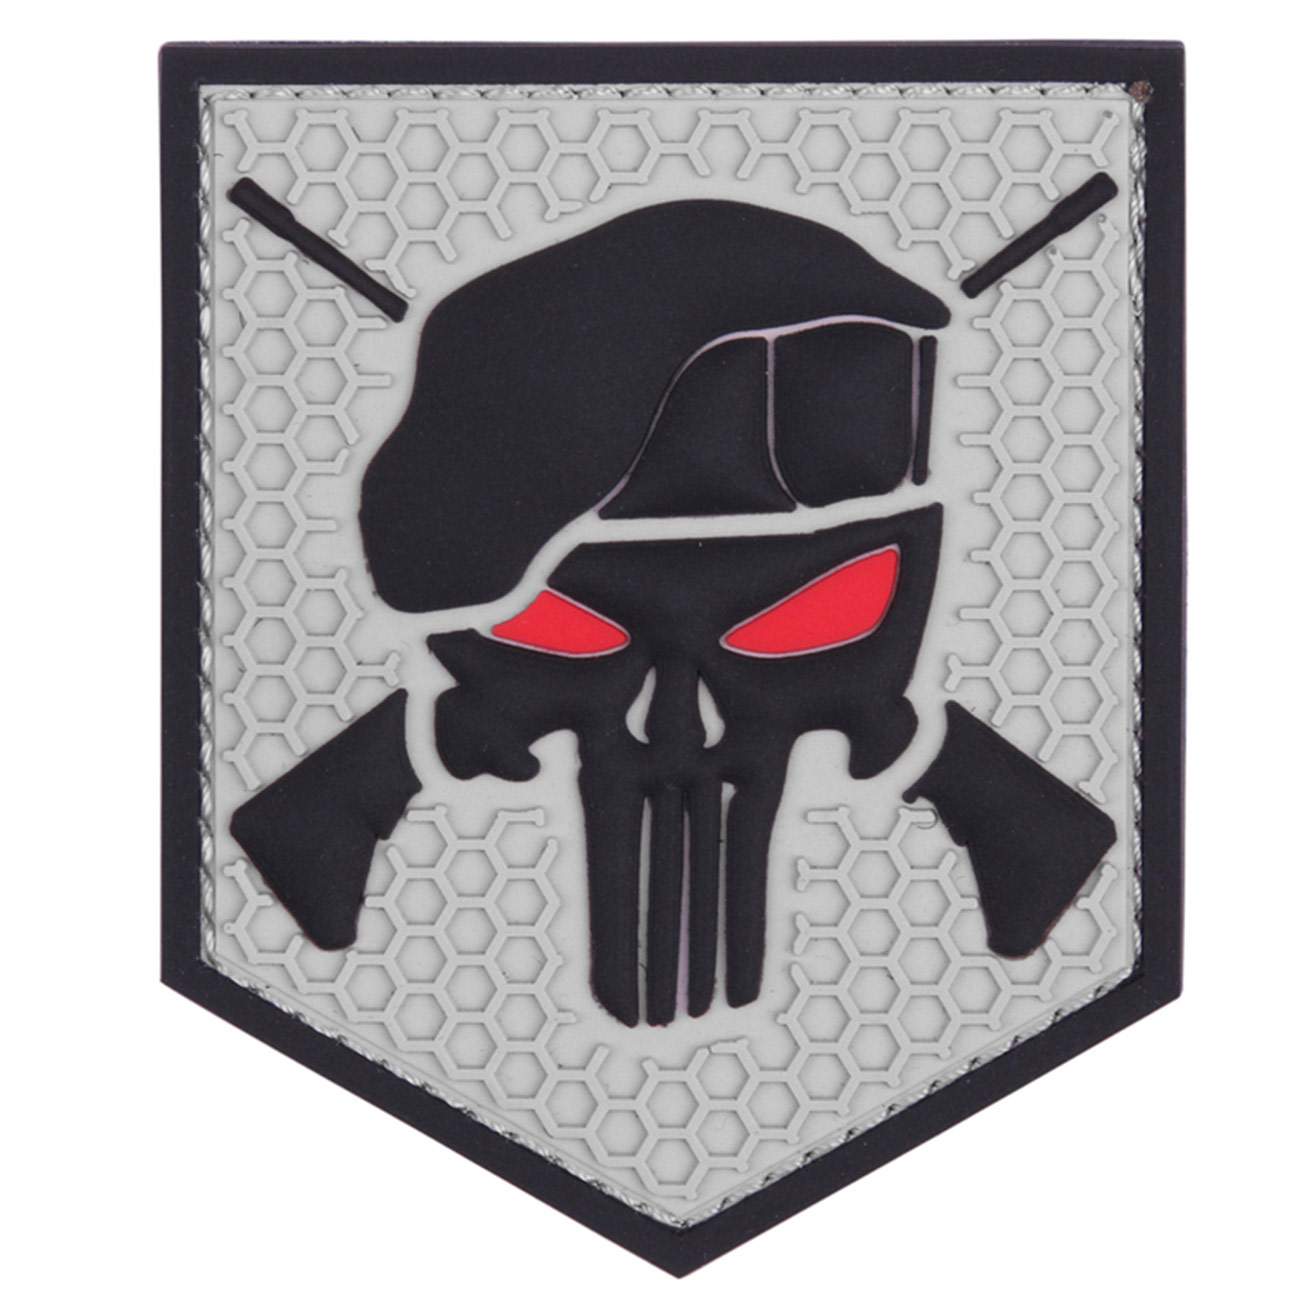 Punisher Germany Patch Skull calavera Patch parche para airsoft Paintball 